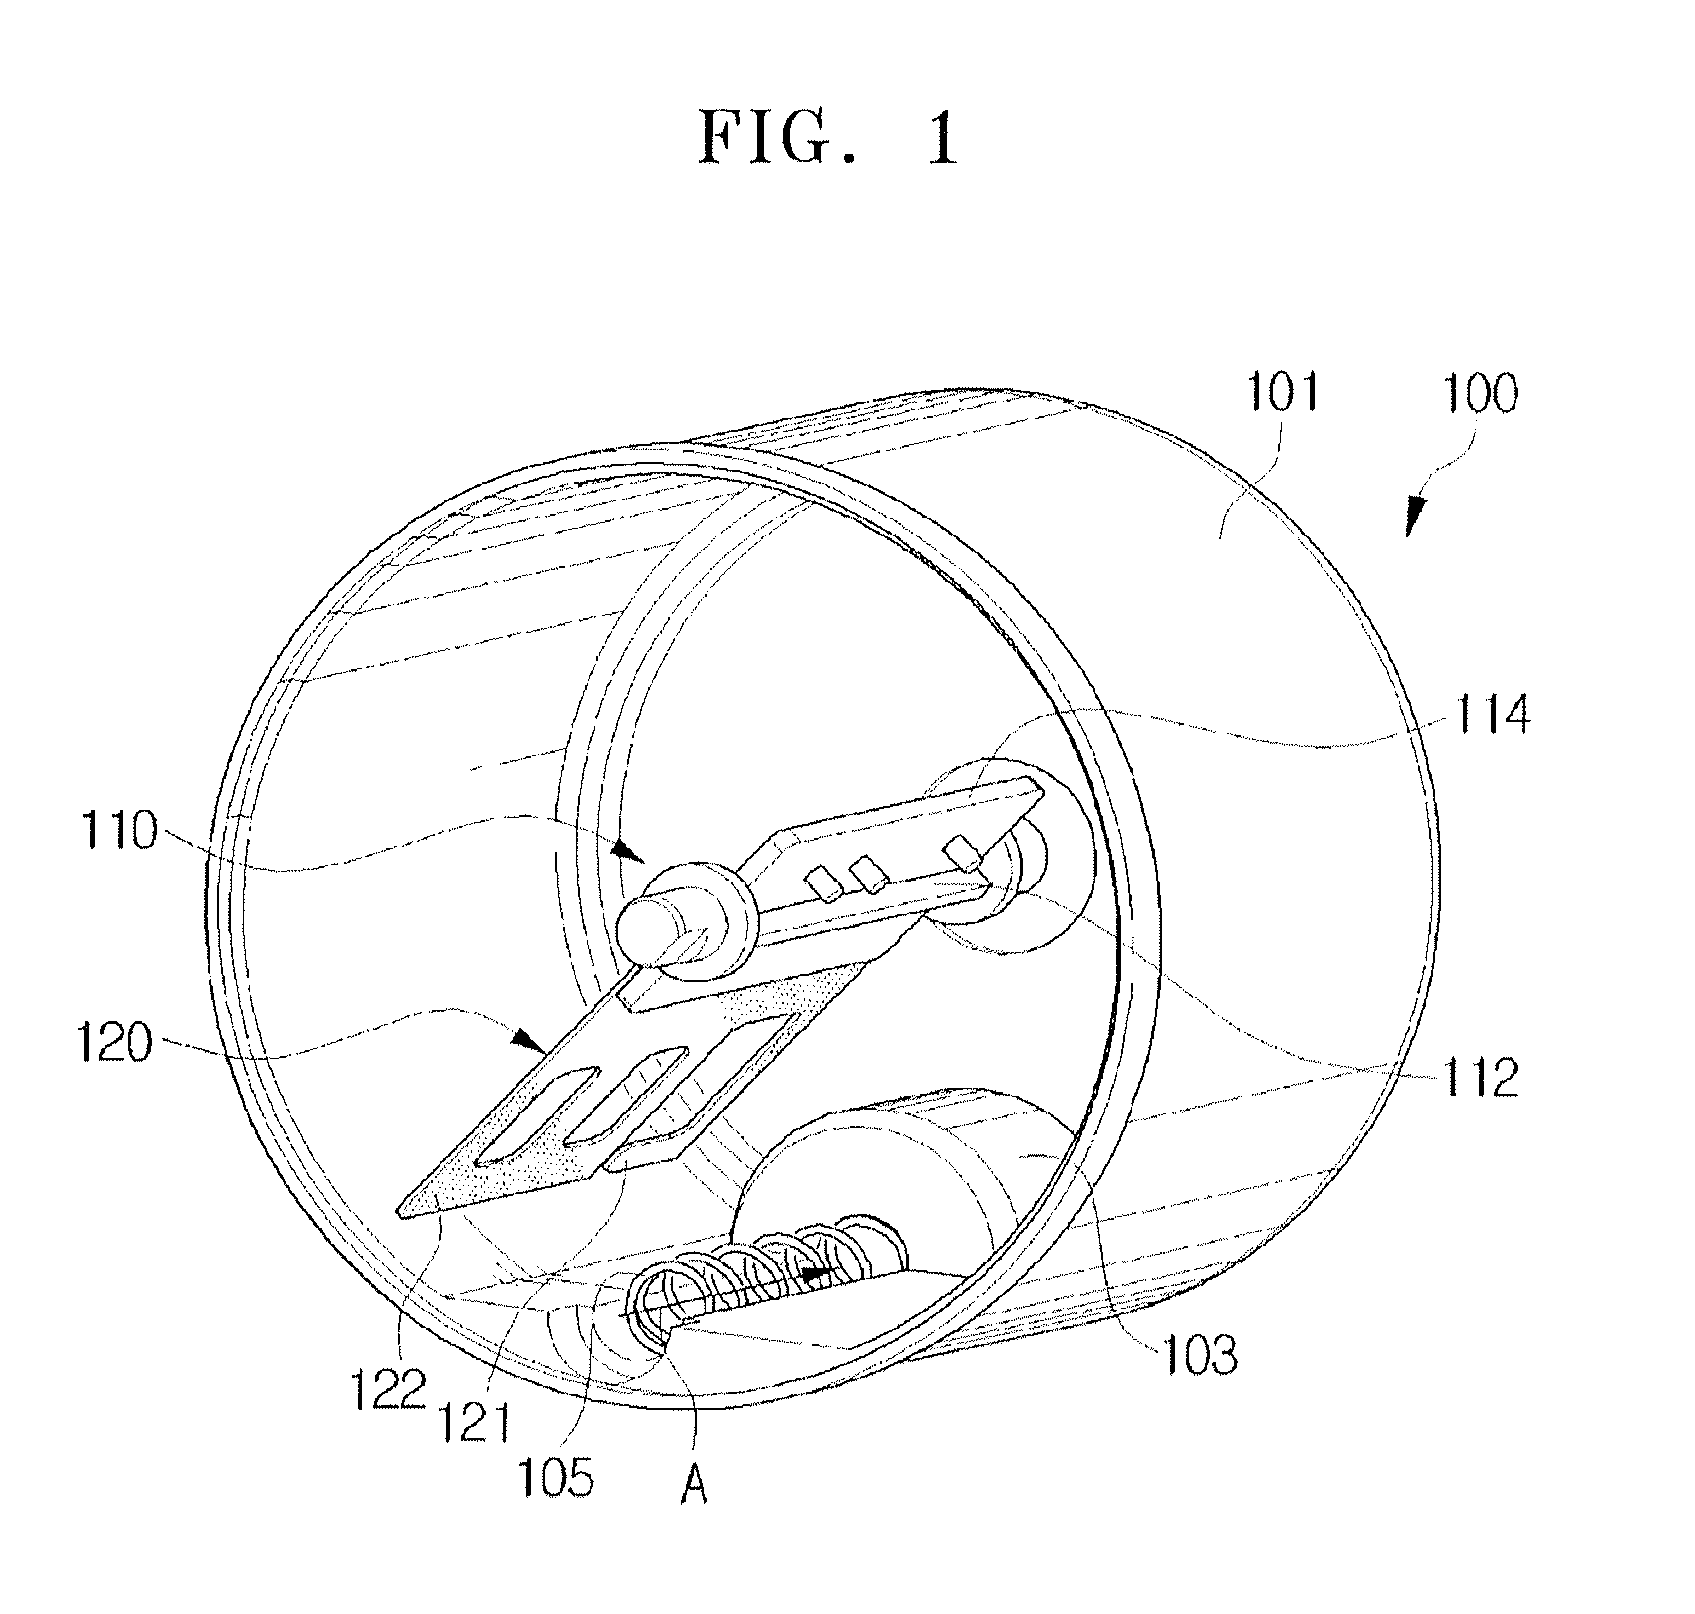 Toner to develop an electrostatic latent image and method of preparing the same